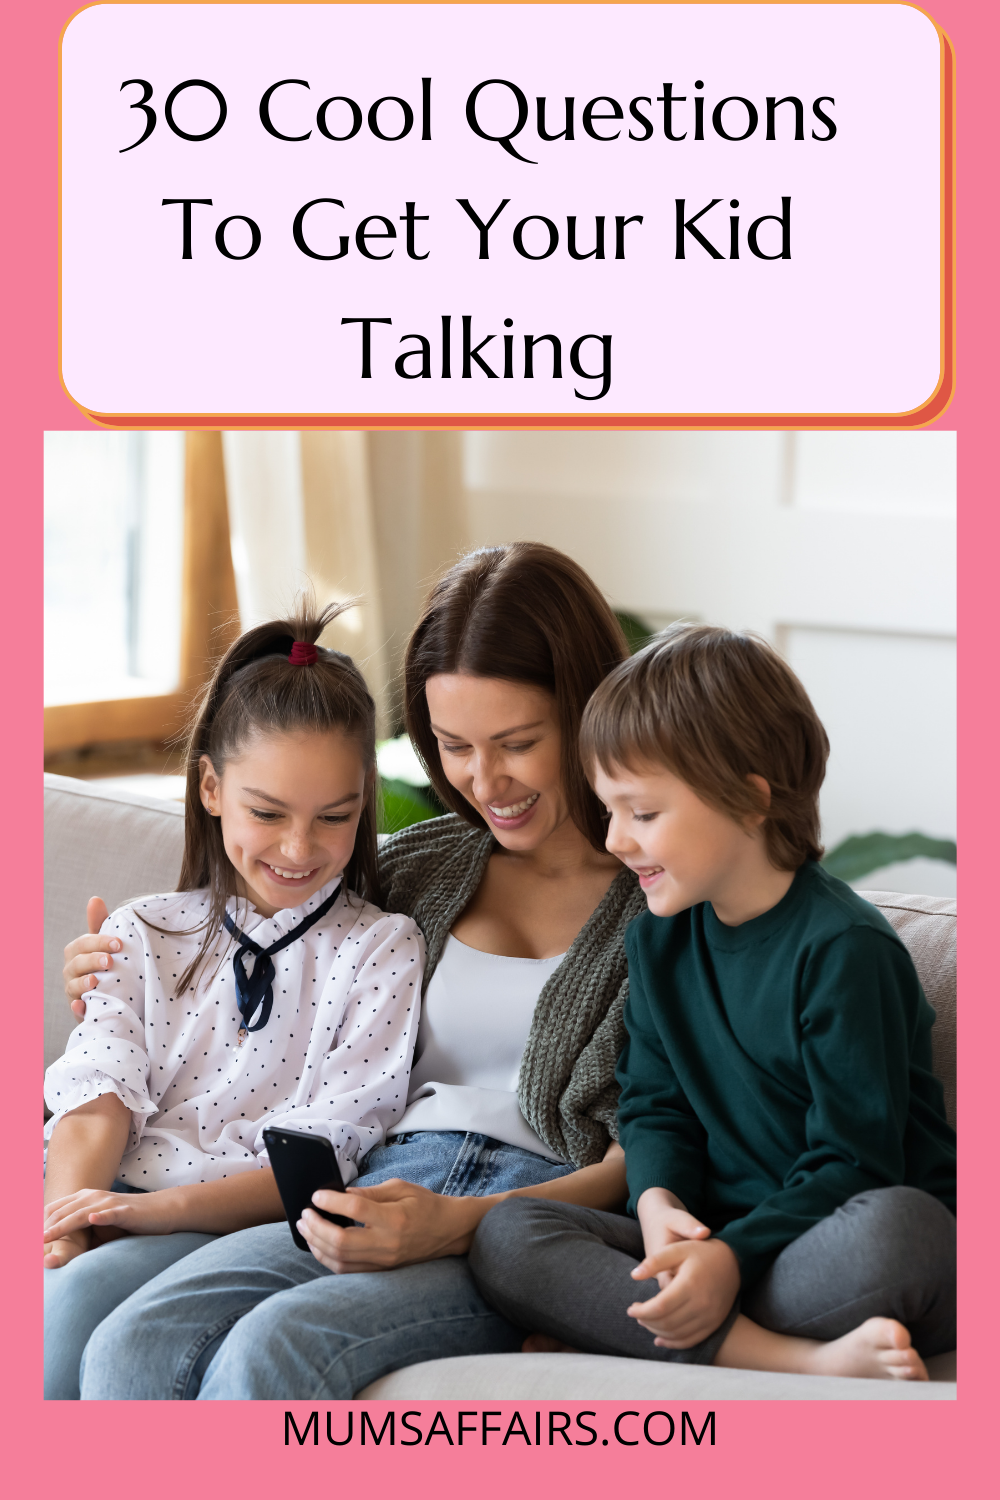 cool Questions To Get Your Kid Talking